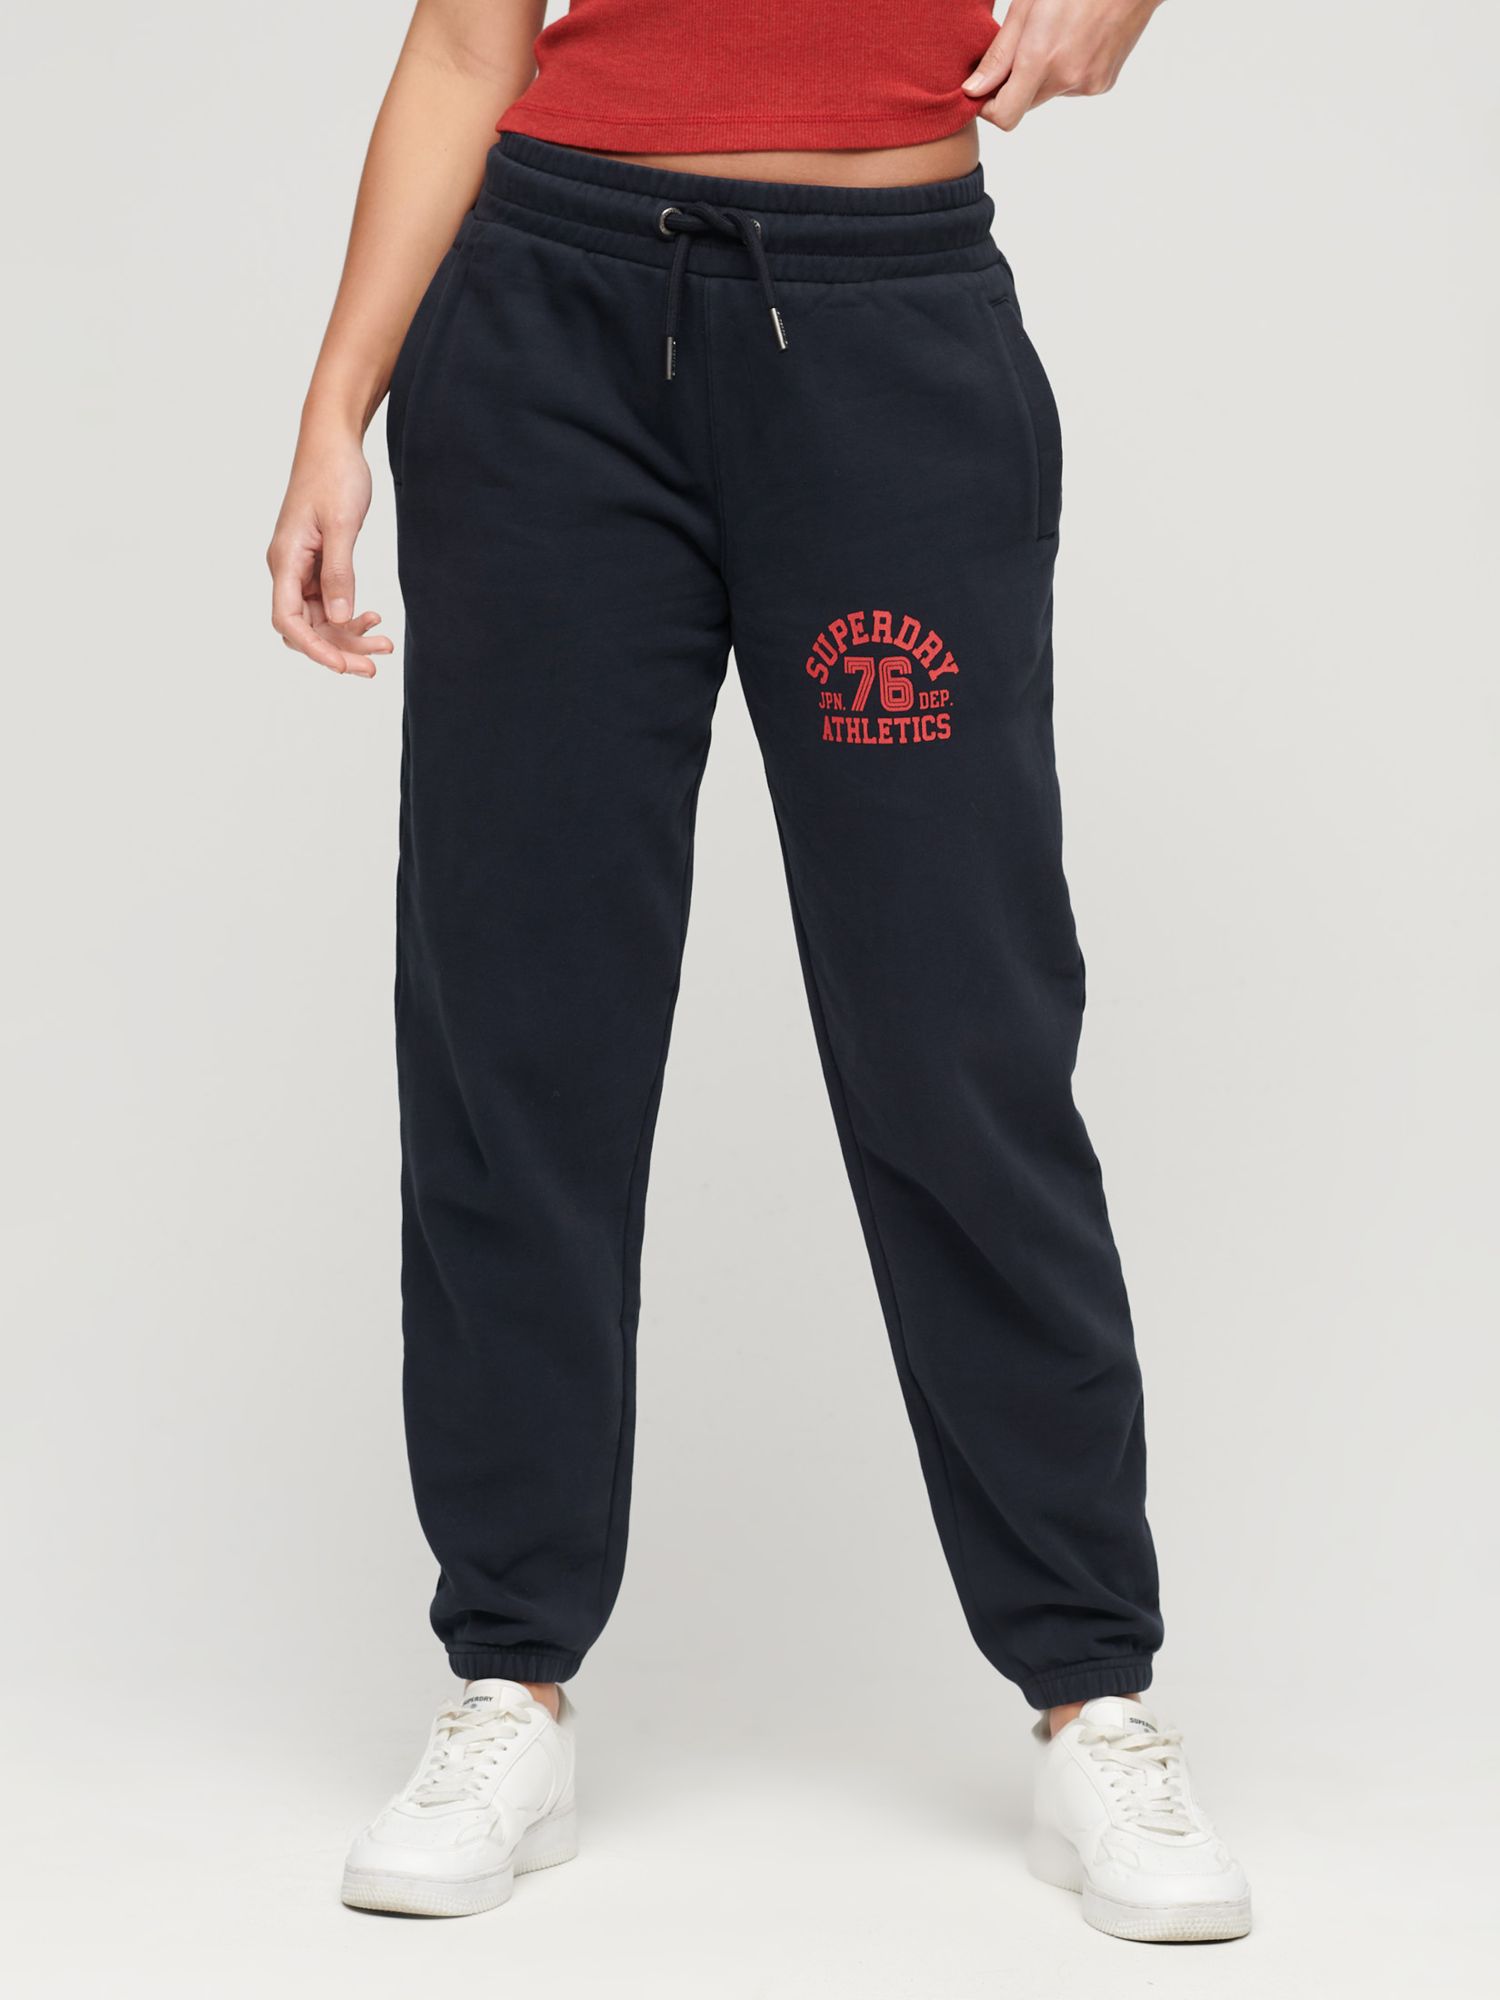 Superdry Athletic College Loose Joggers, Navy/Red at John Lewis & Partners